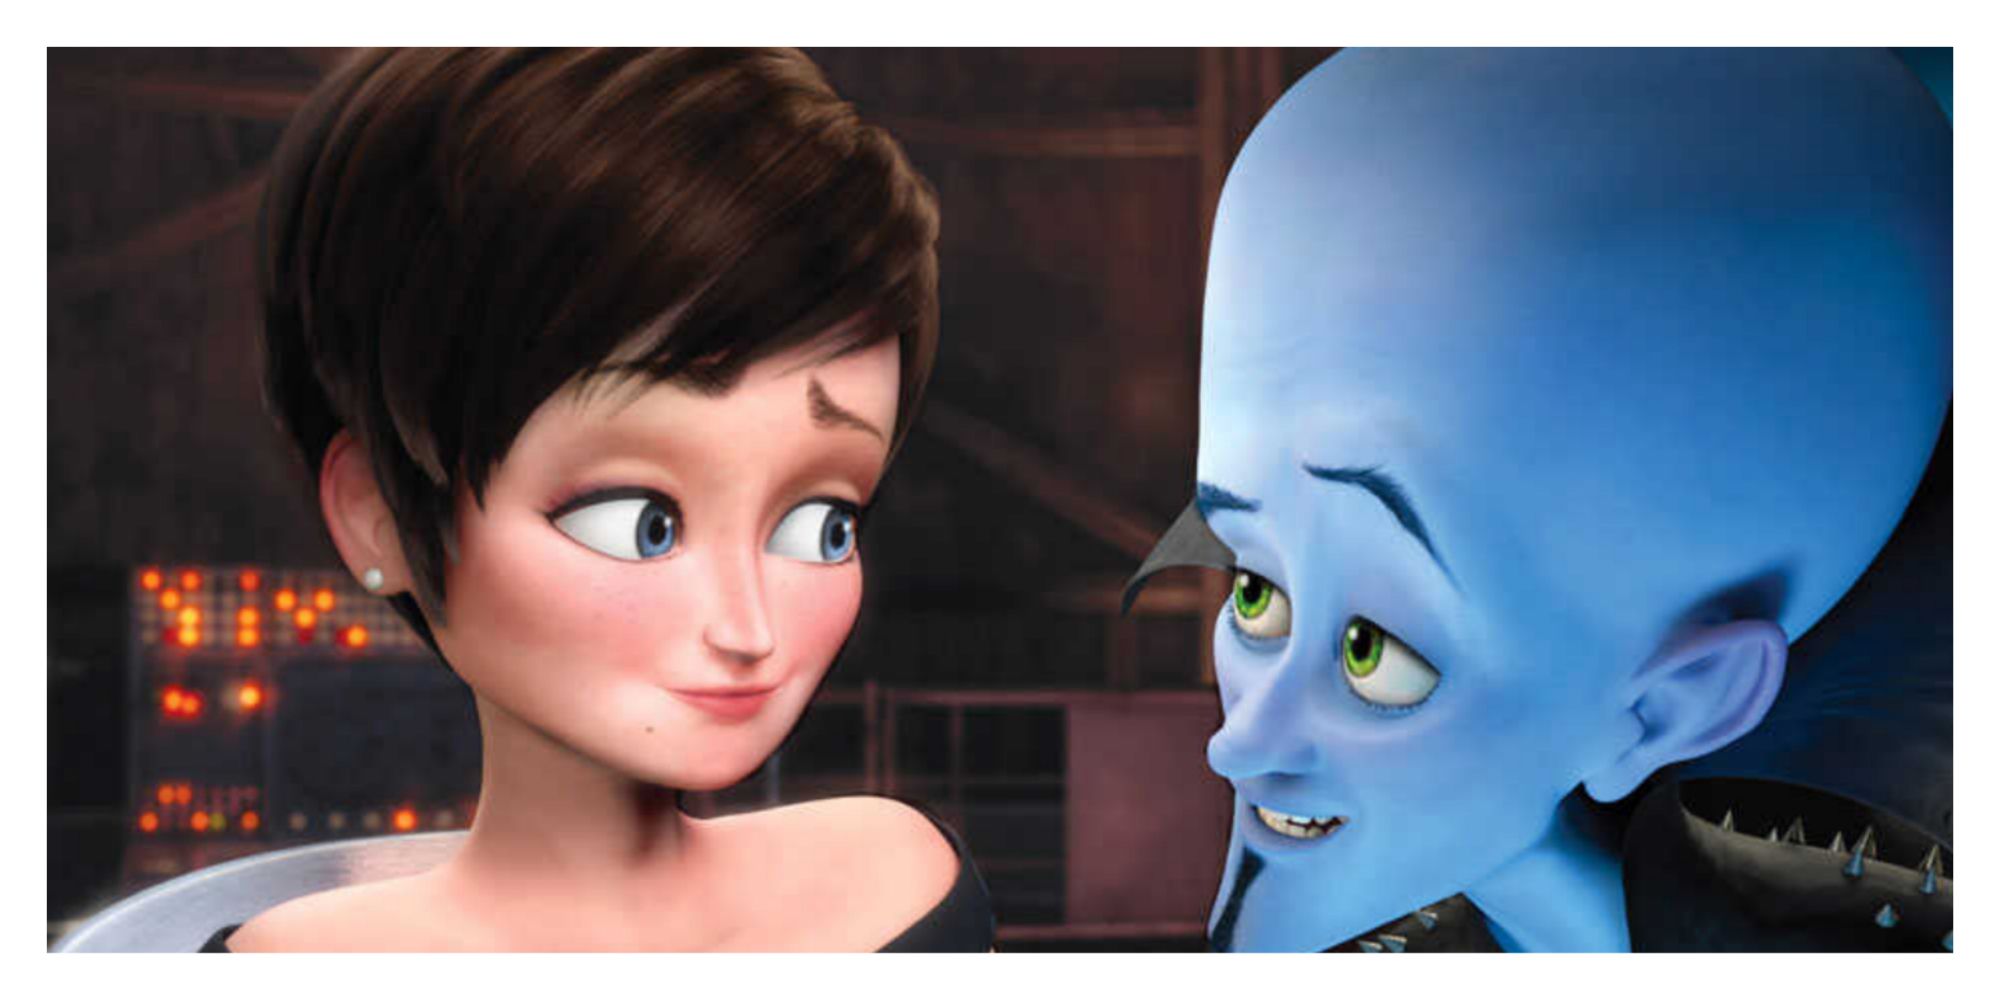 Roxanne and Megamind from Megamind.